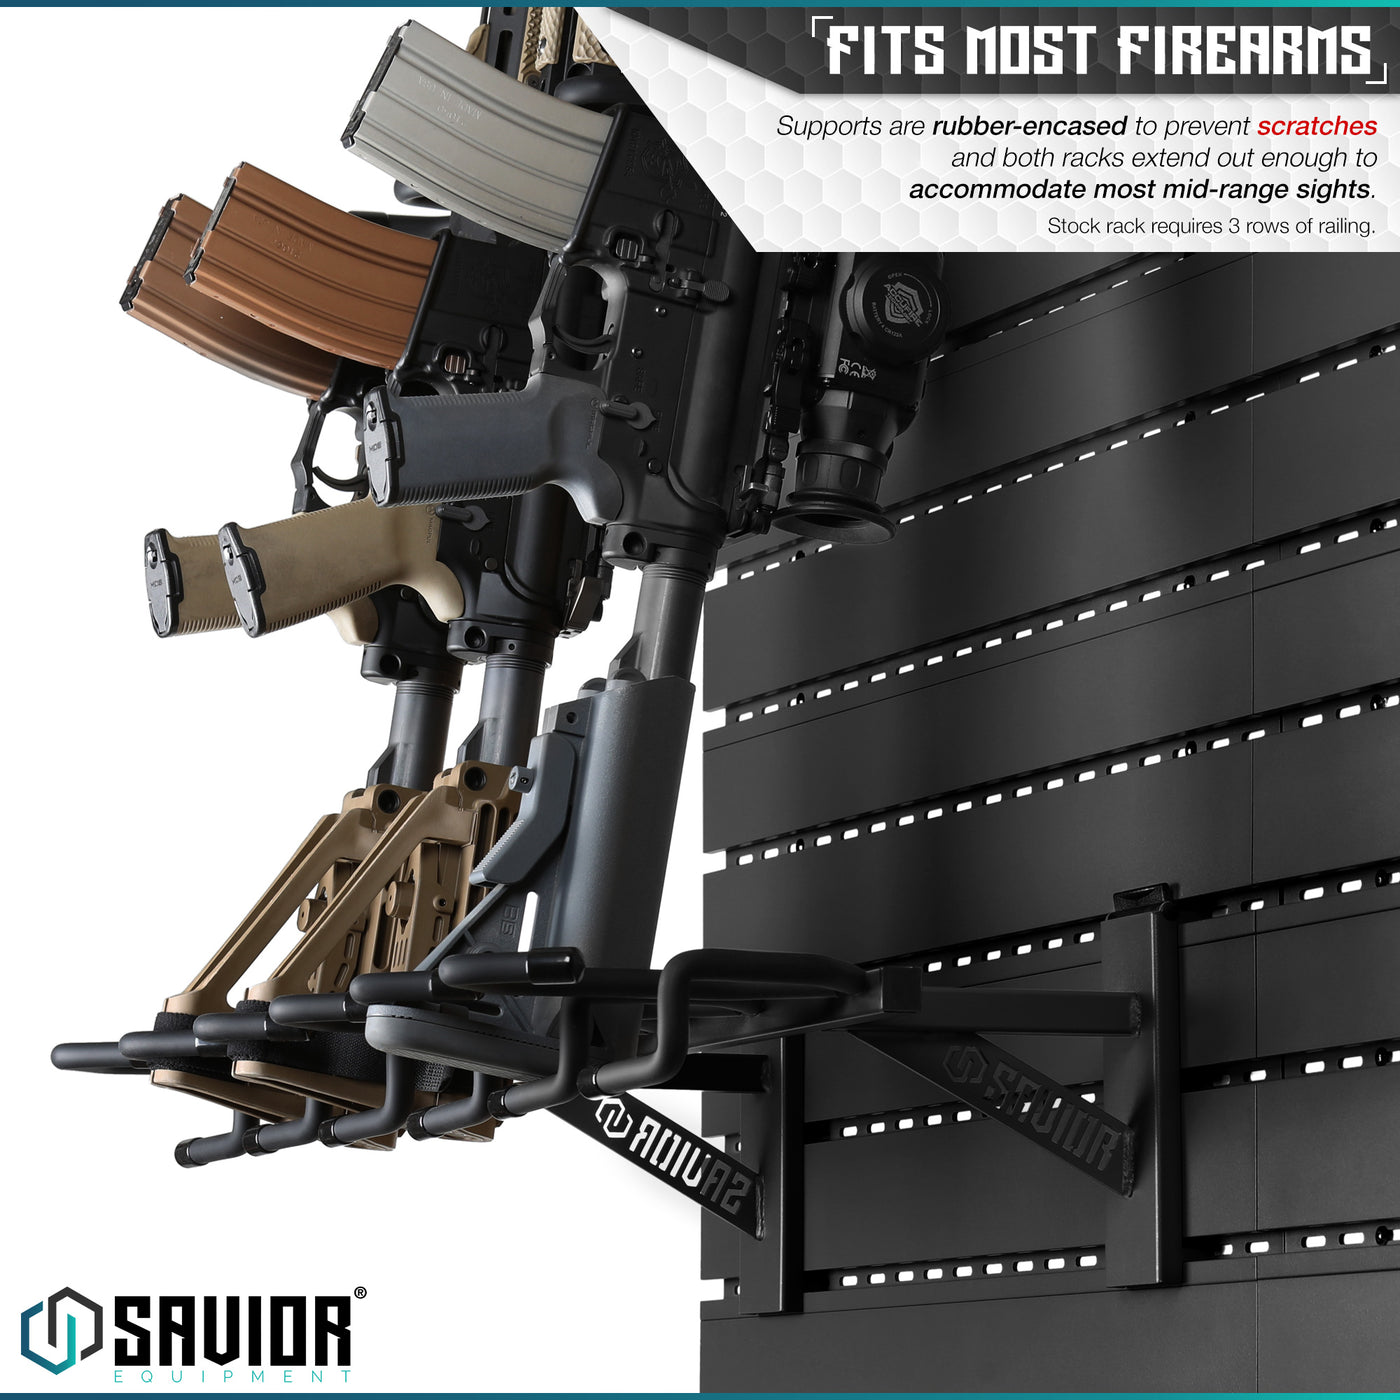 Fits Most Firearms - Supports are rubber-encased to prevent scratches and both racks extend out enough to accomodate most mid-range sights. Stock rack requires 3 rows of railing.